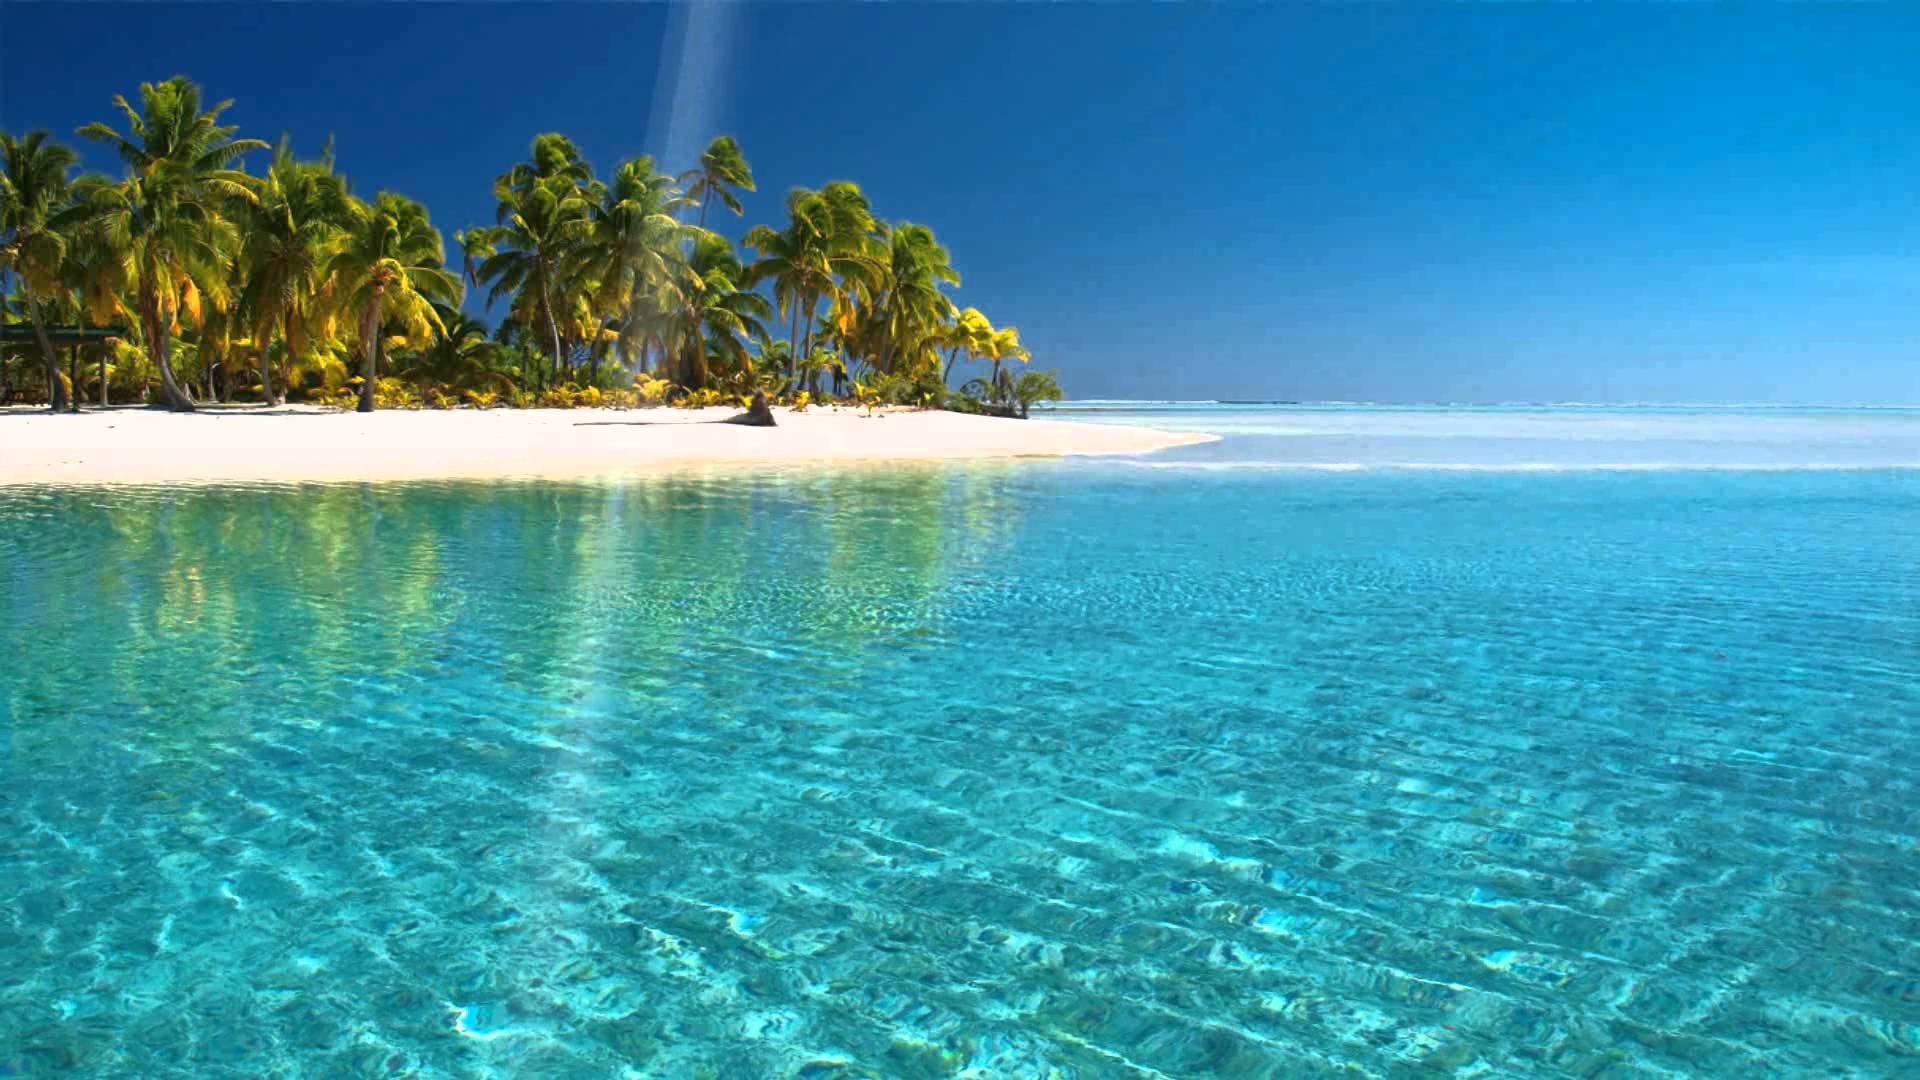 Beach Live Wallpaper For Pc - The great collection of 3d live ...